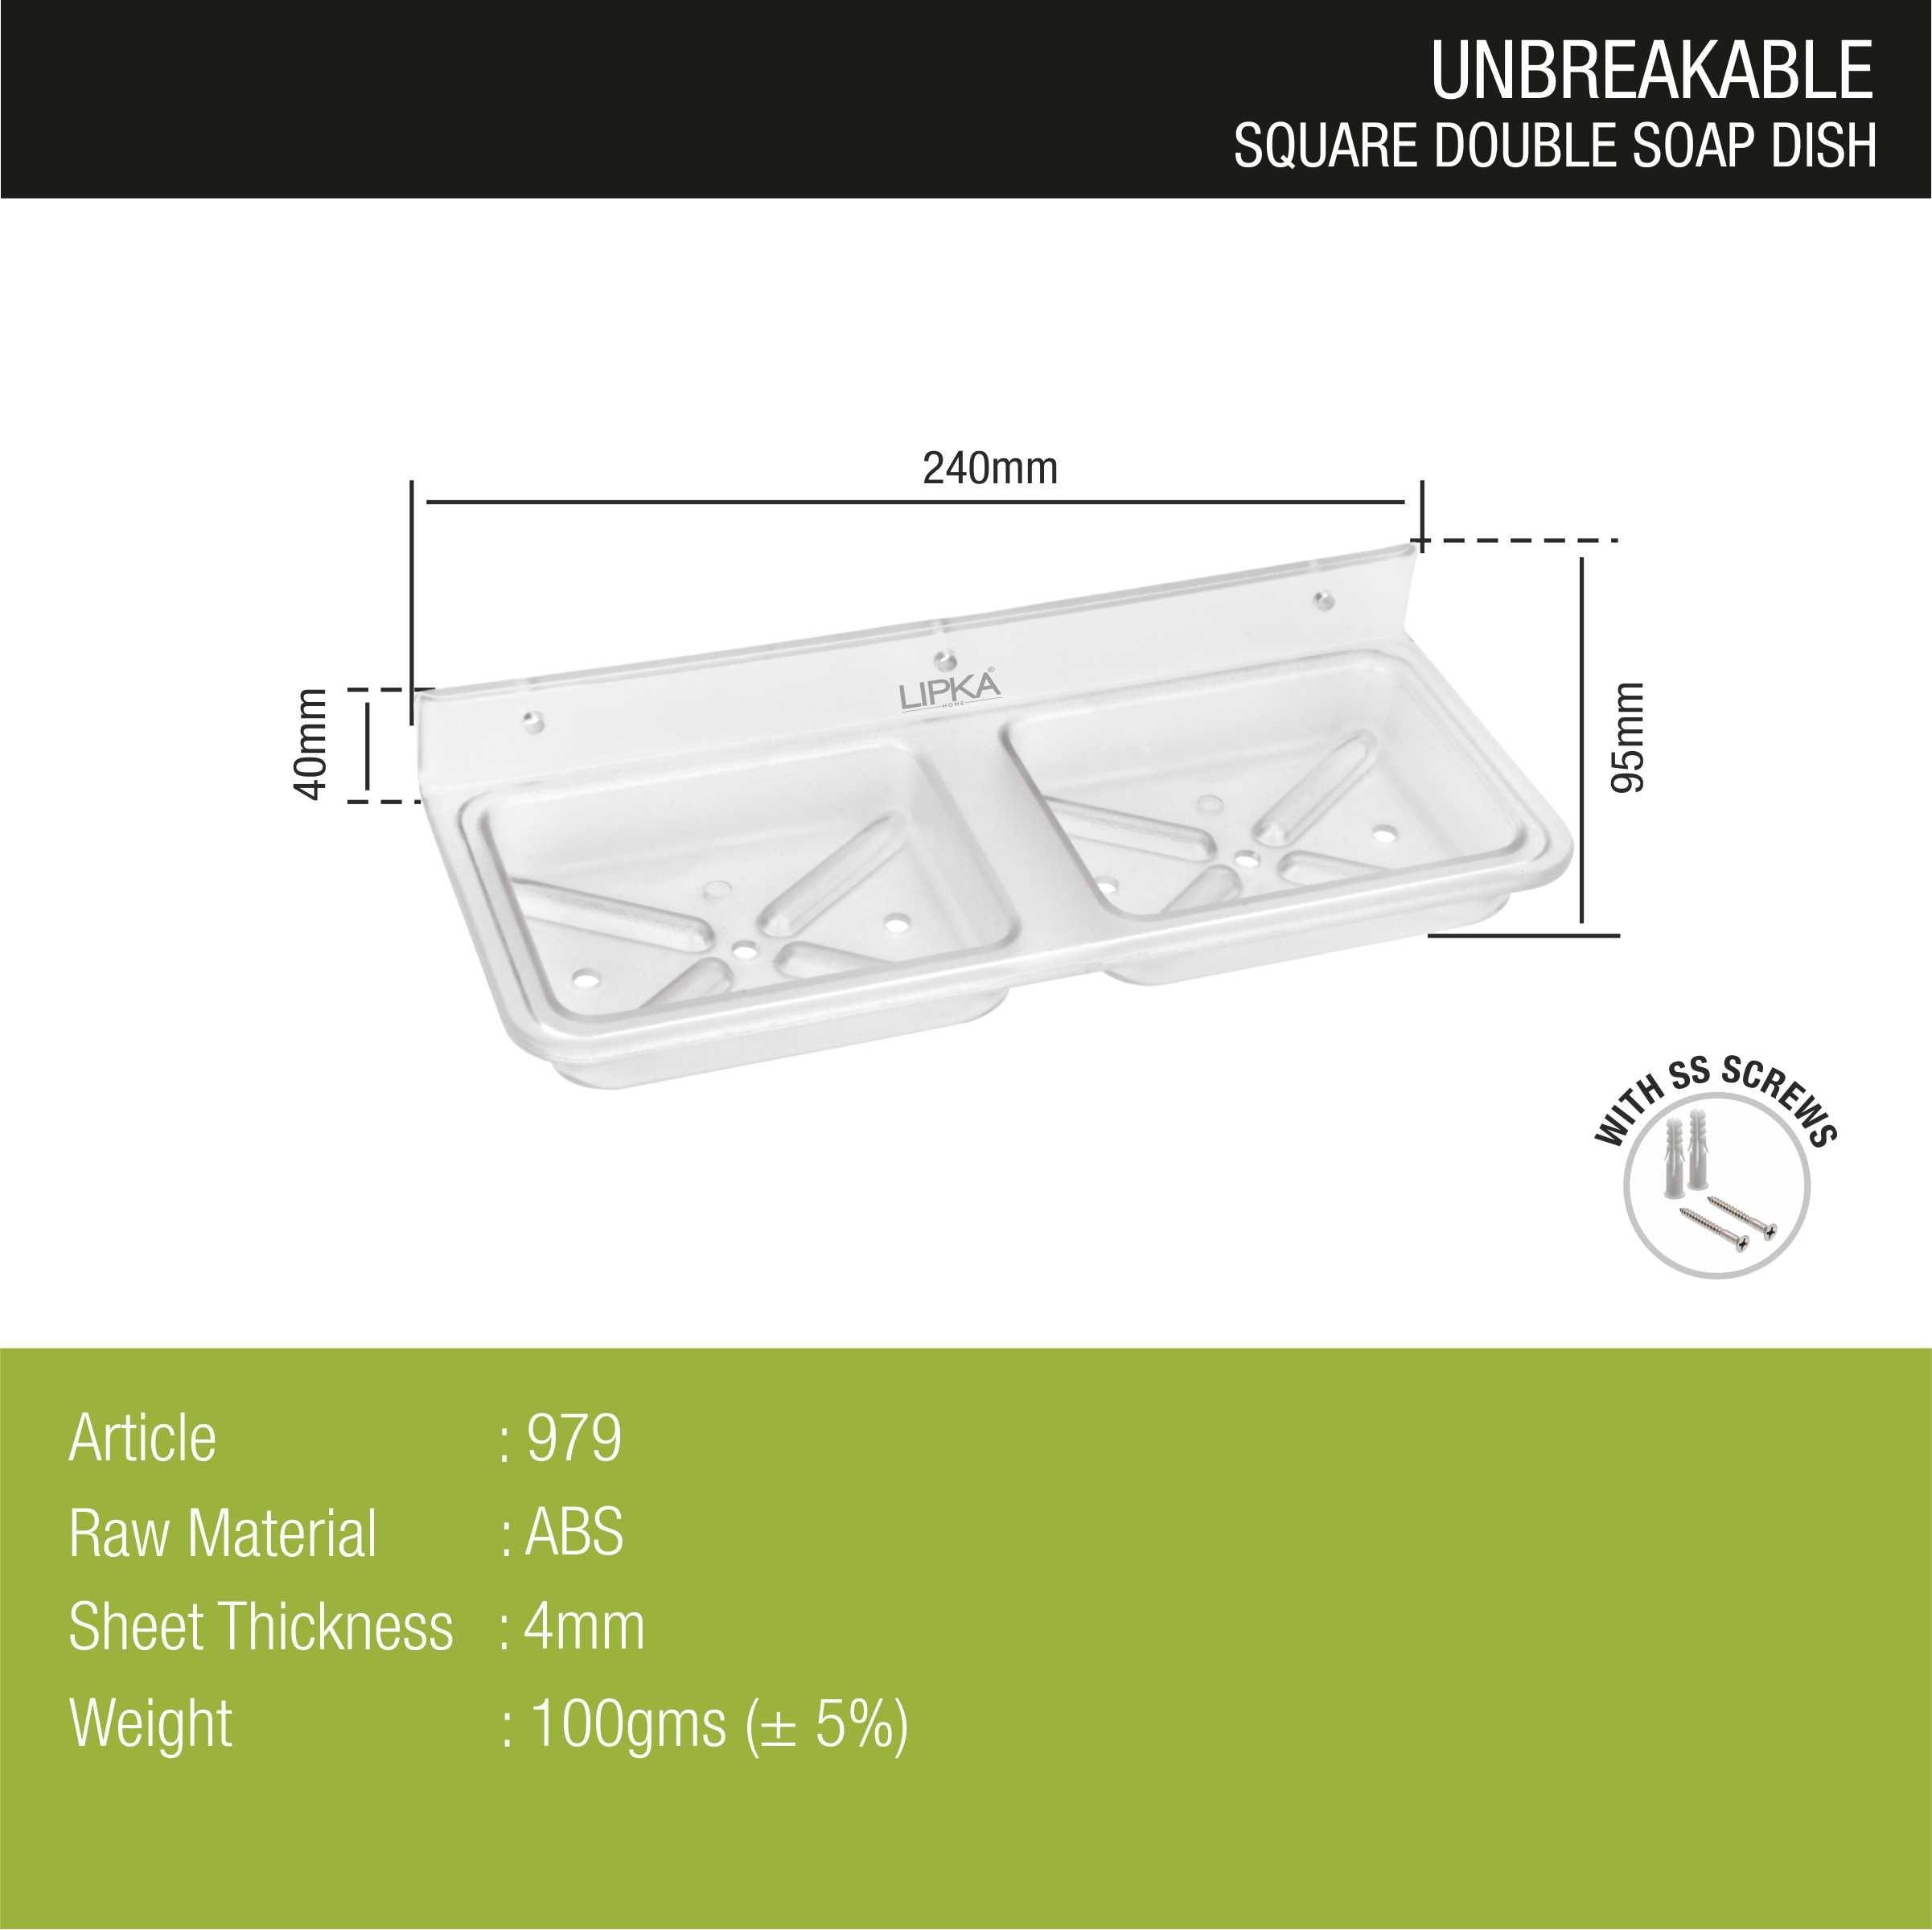 ABS Square Double Soap Dish dimensions and sizes